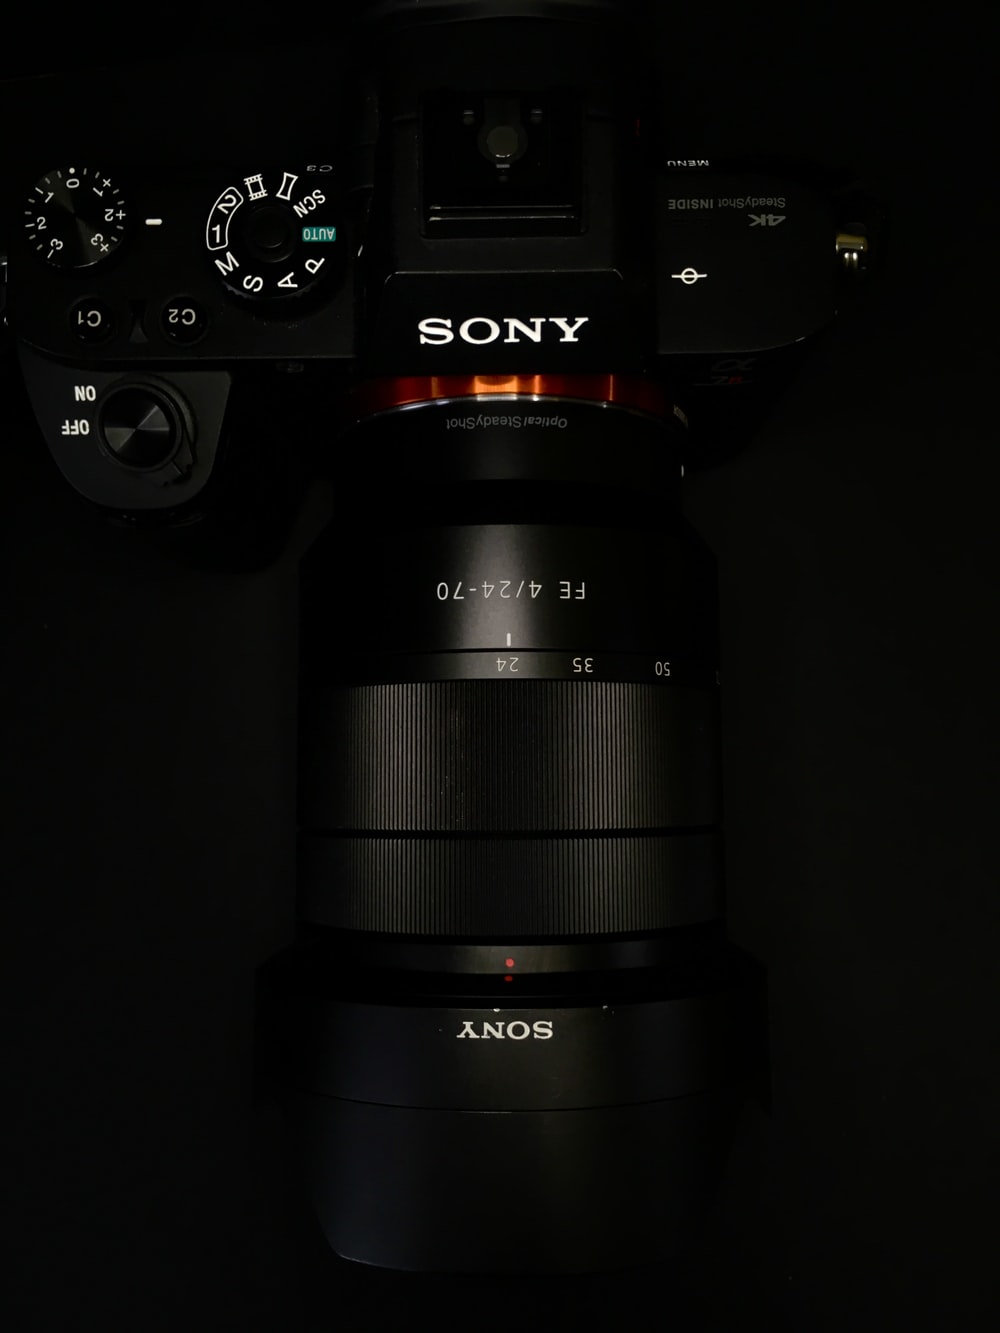 Sony A7 Picture. Download Free Image